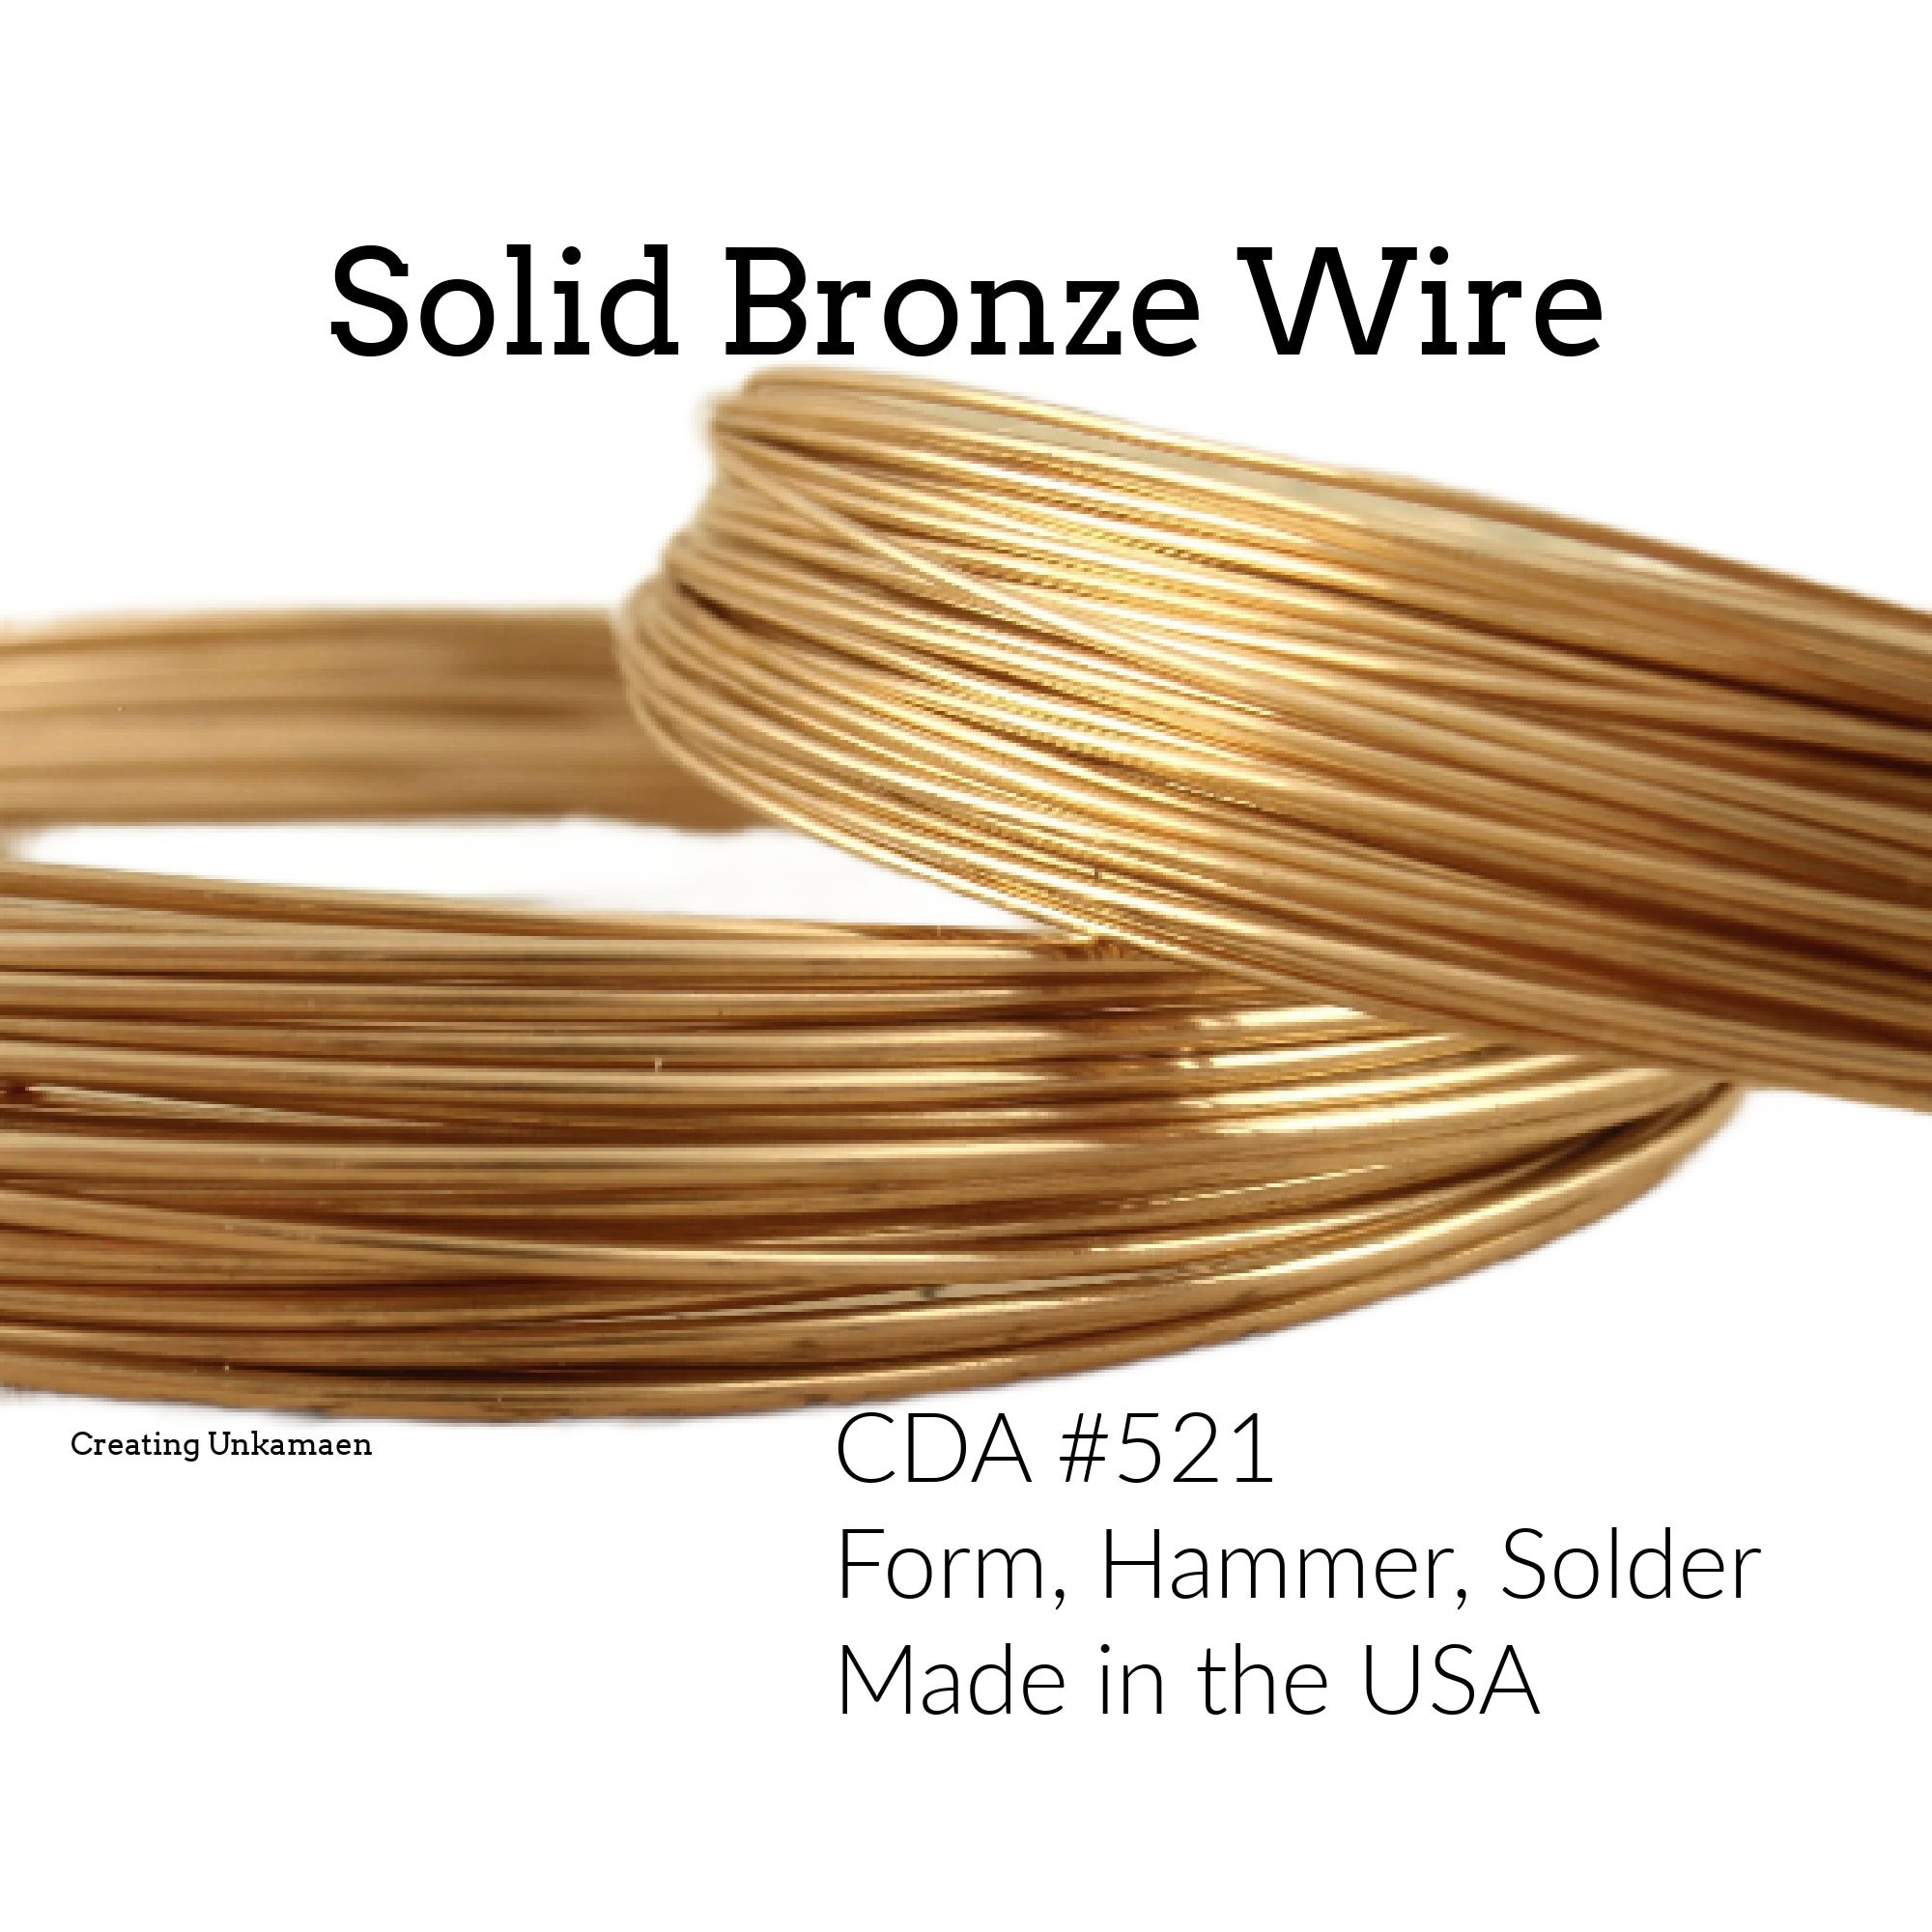 Round Solid Bronze Wire 100% Guarantee 4, 6, 8, 10, 12, 14, 16, 18, 20, 22,  24, 26, 28 Gauge Made in the USA 